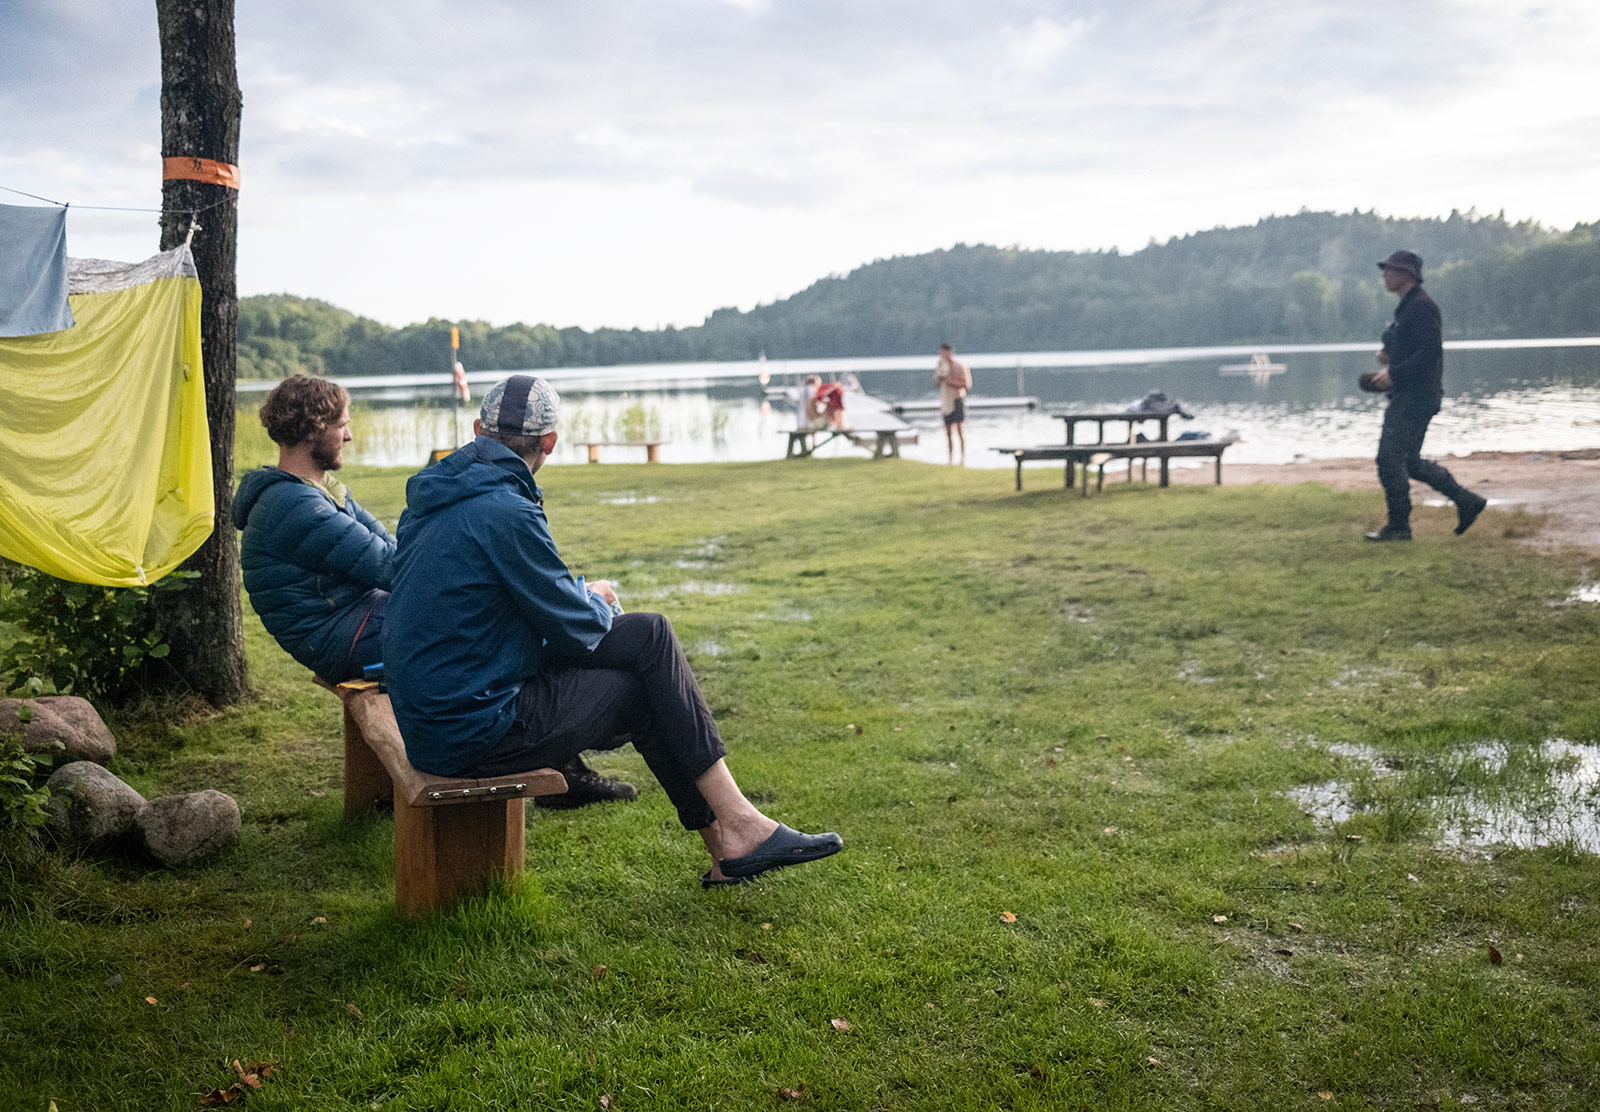 Two people at on a bench next to a lake